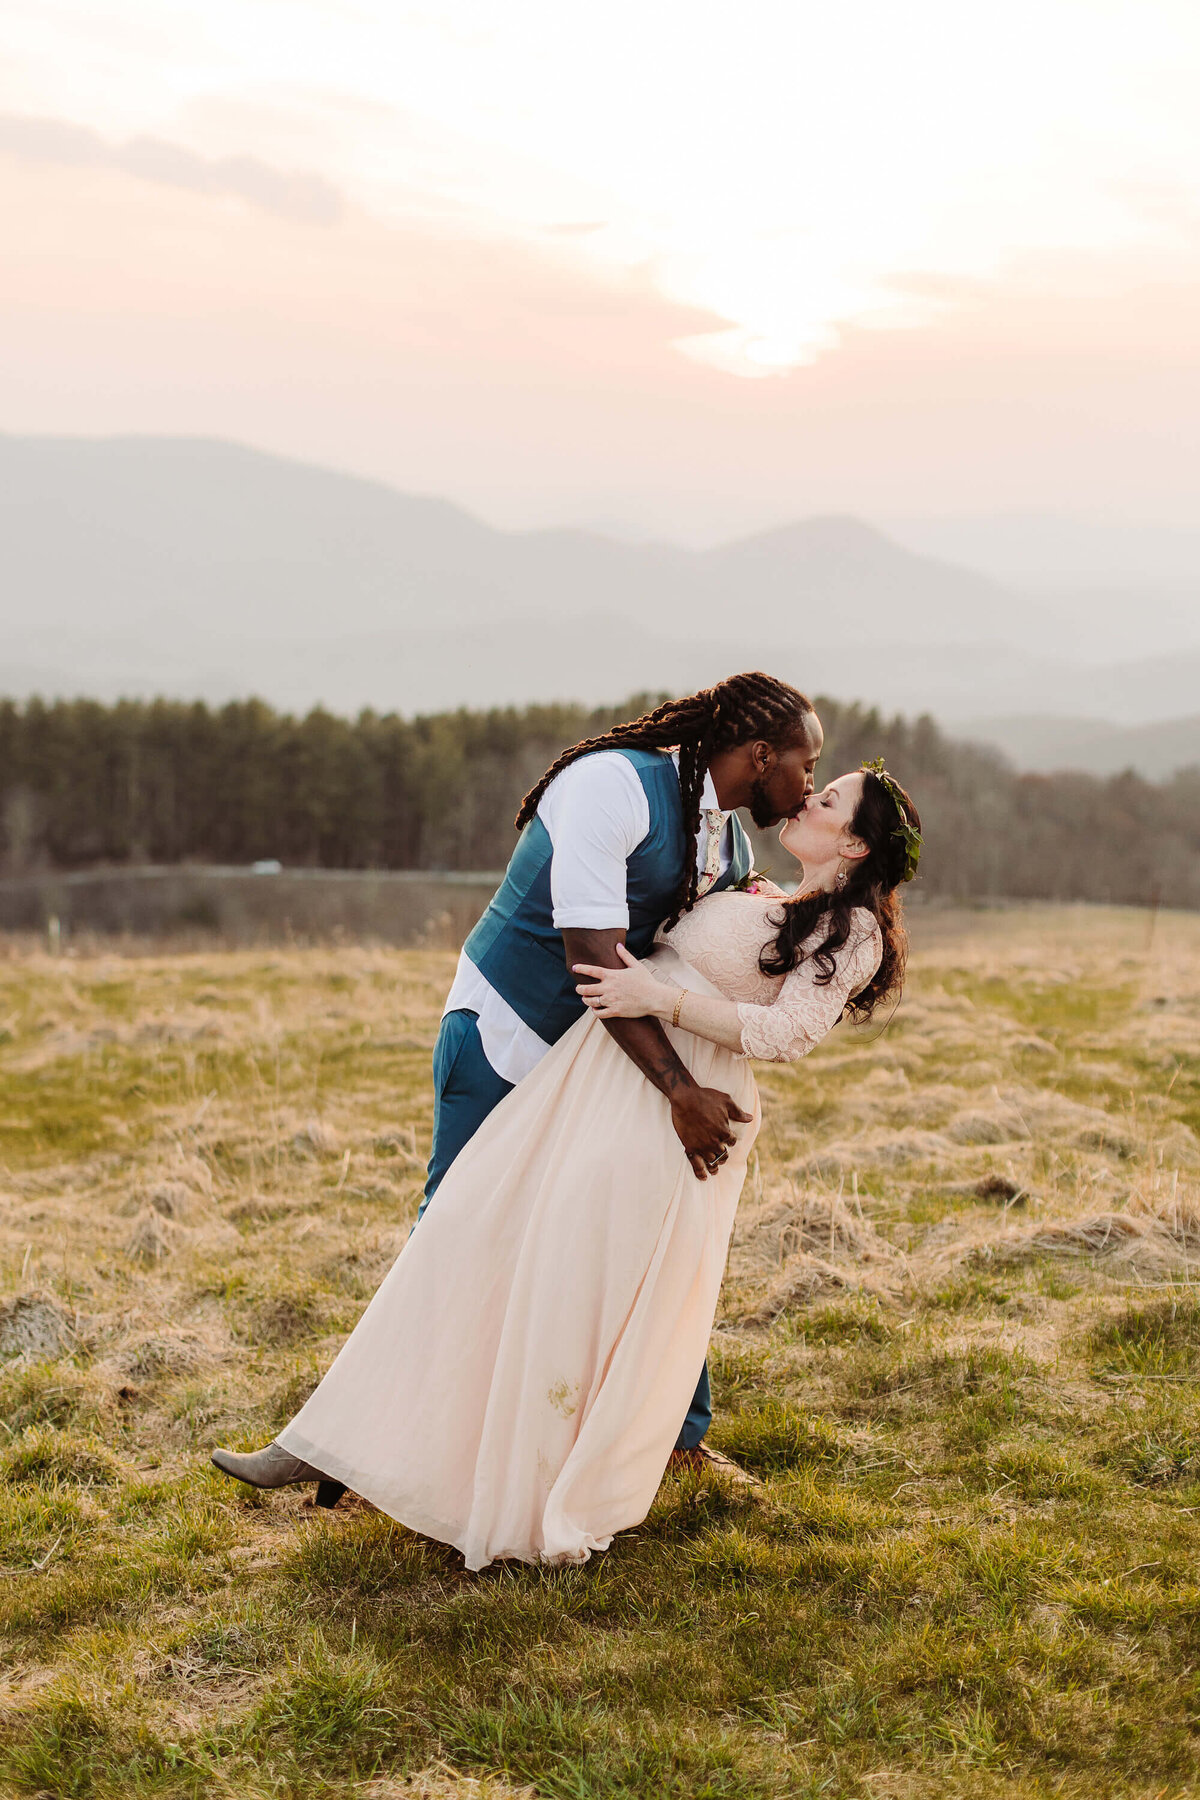 Max-Patch-Sunset-Mountain-Elopement-89